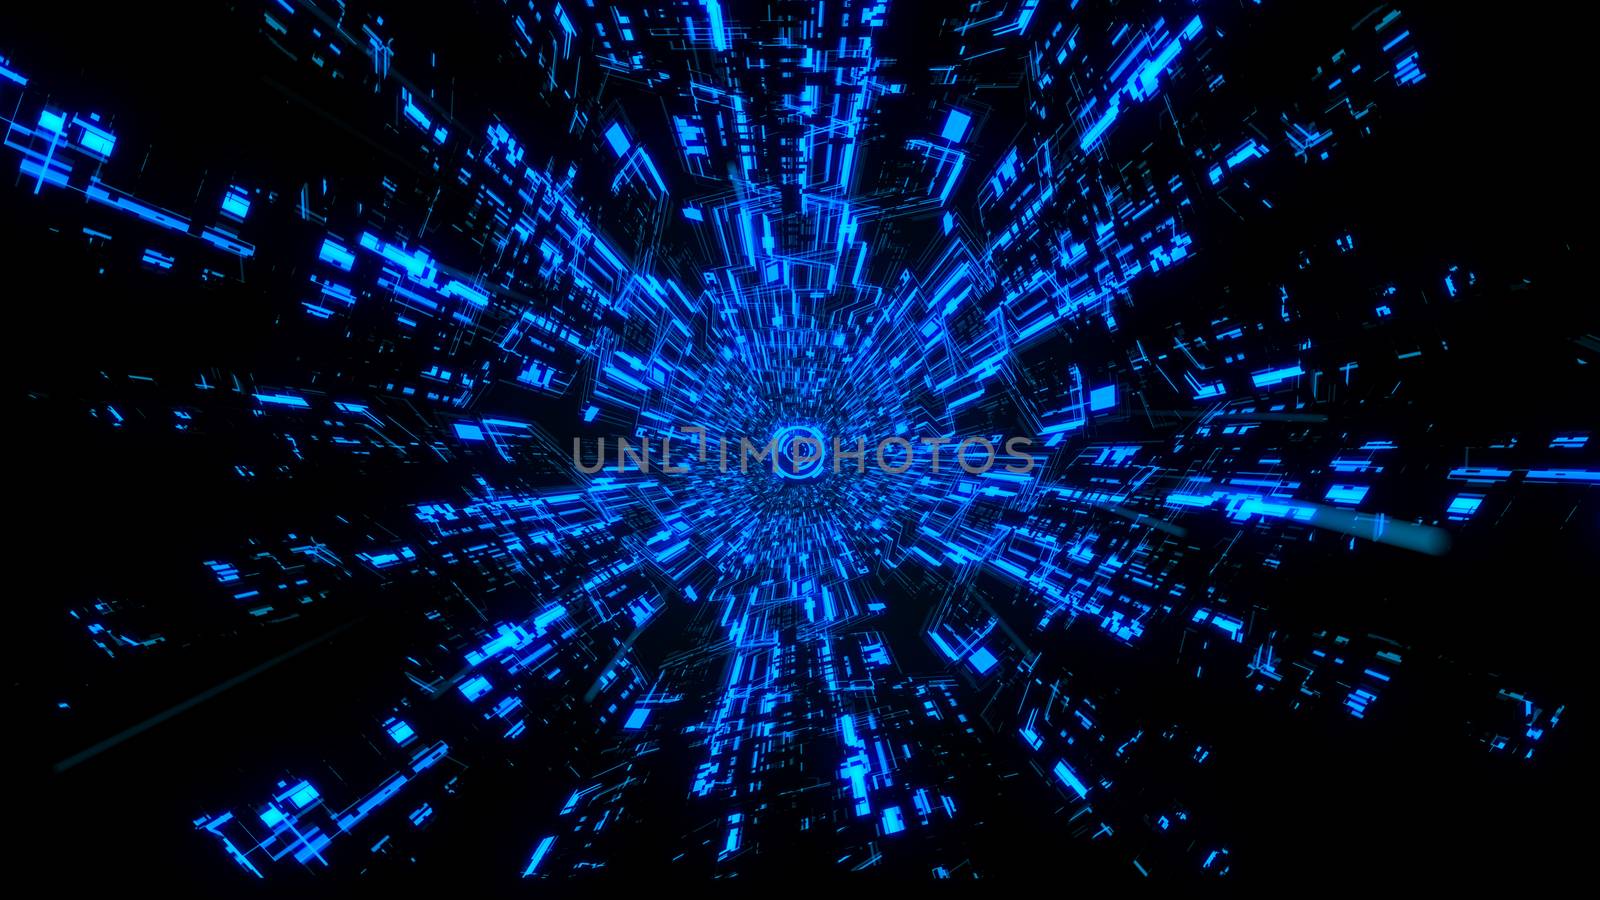 3D Digital Circuit System Tunnels and Waves with Digital Circles in the middle in Blue color theme Background Ver.1